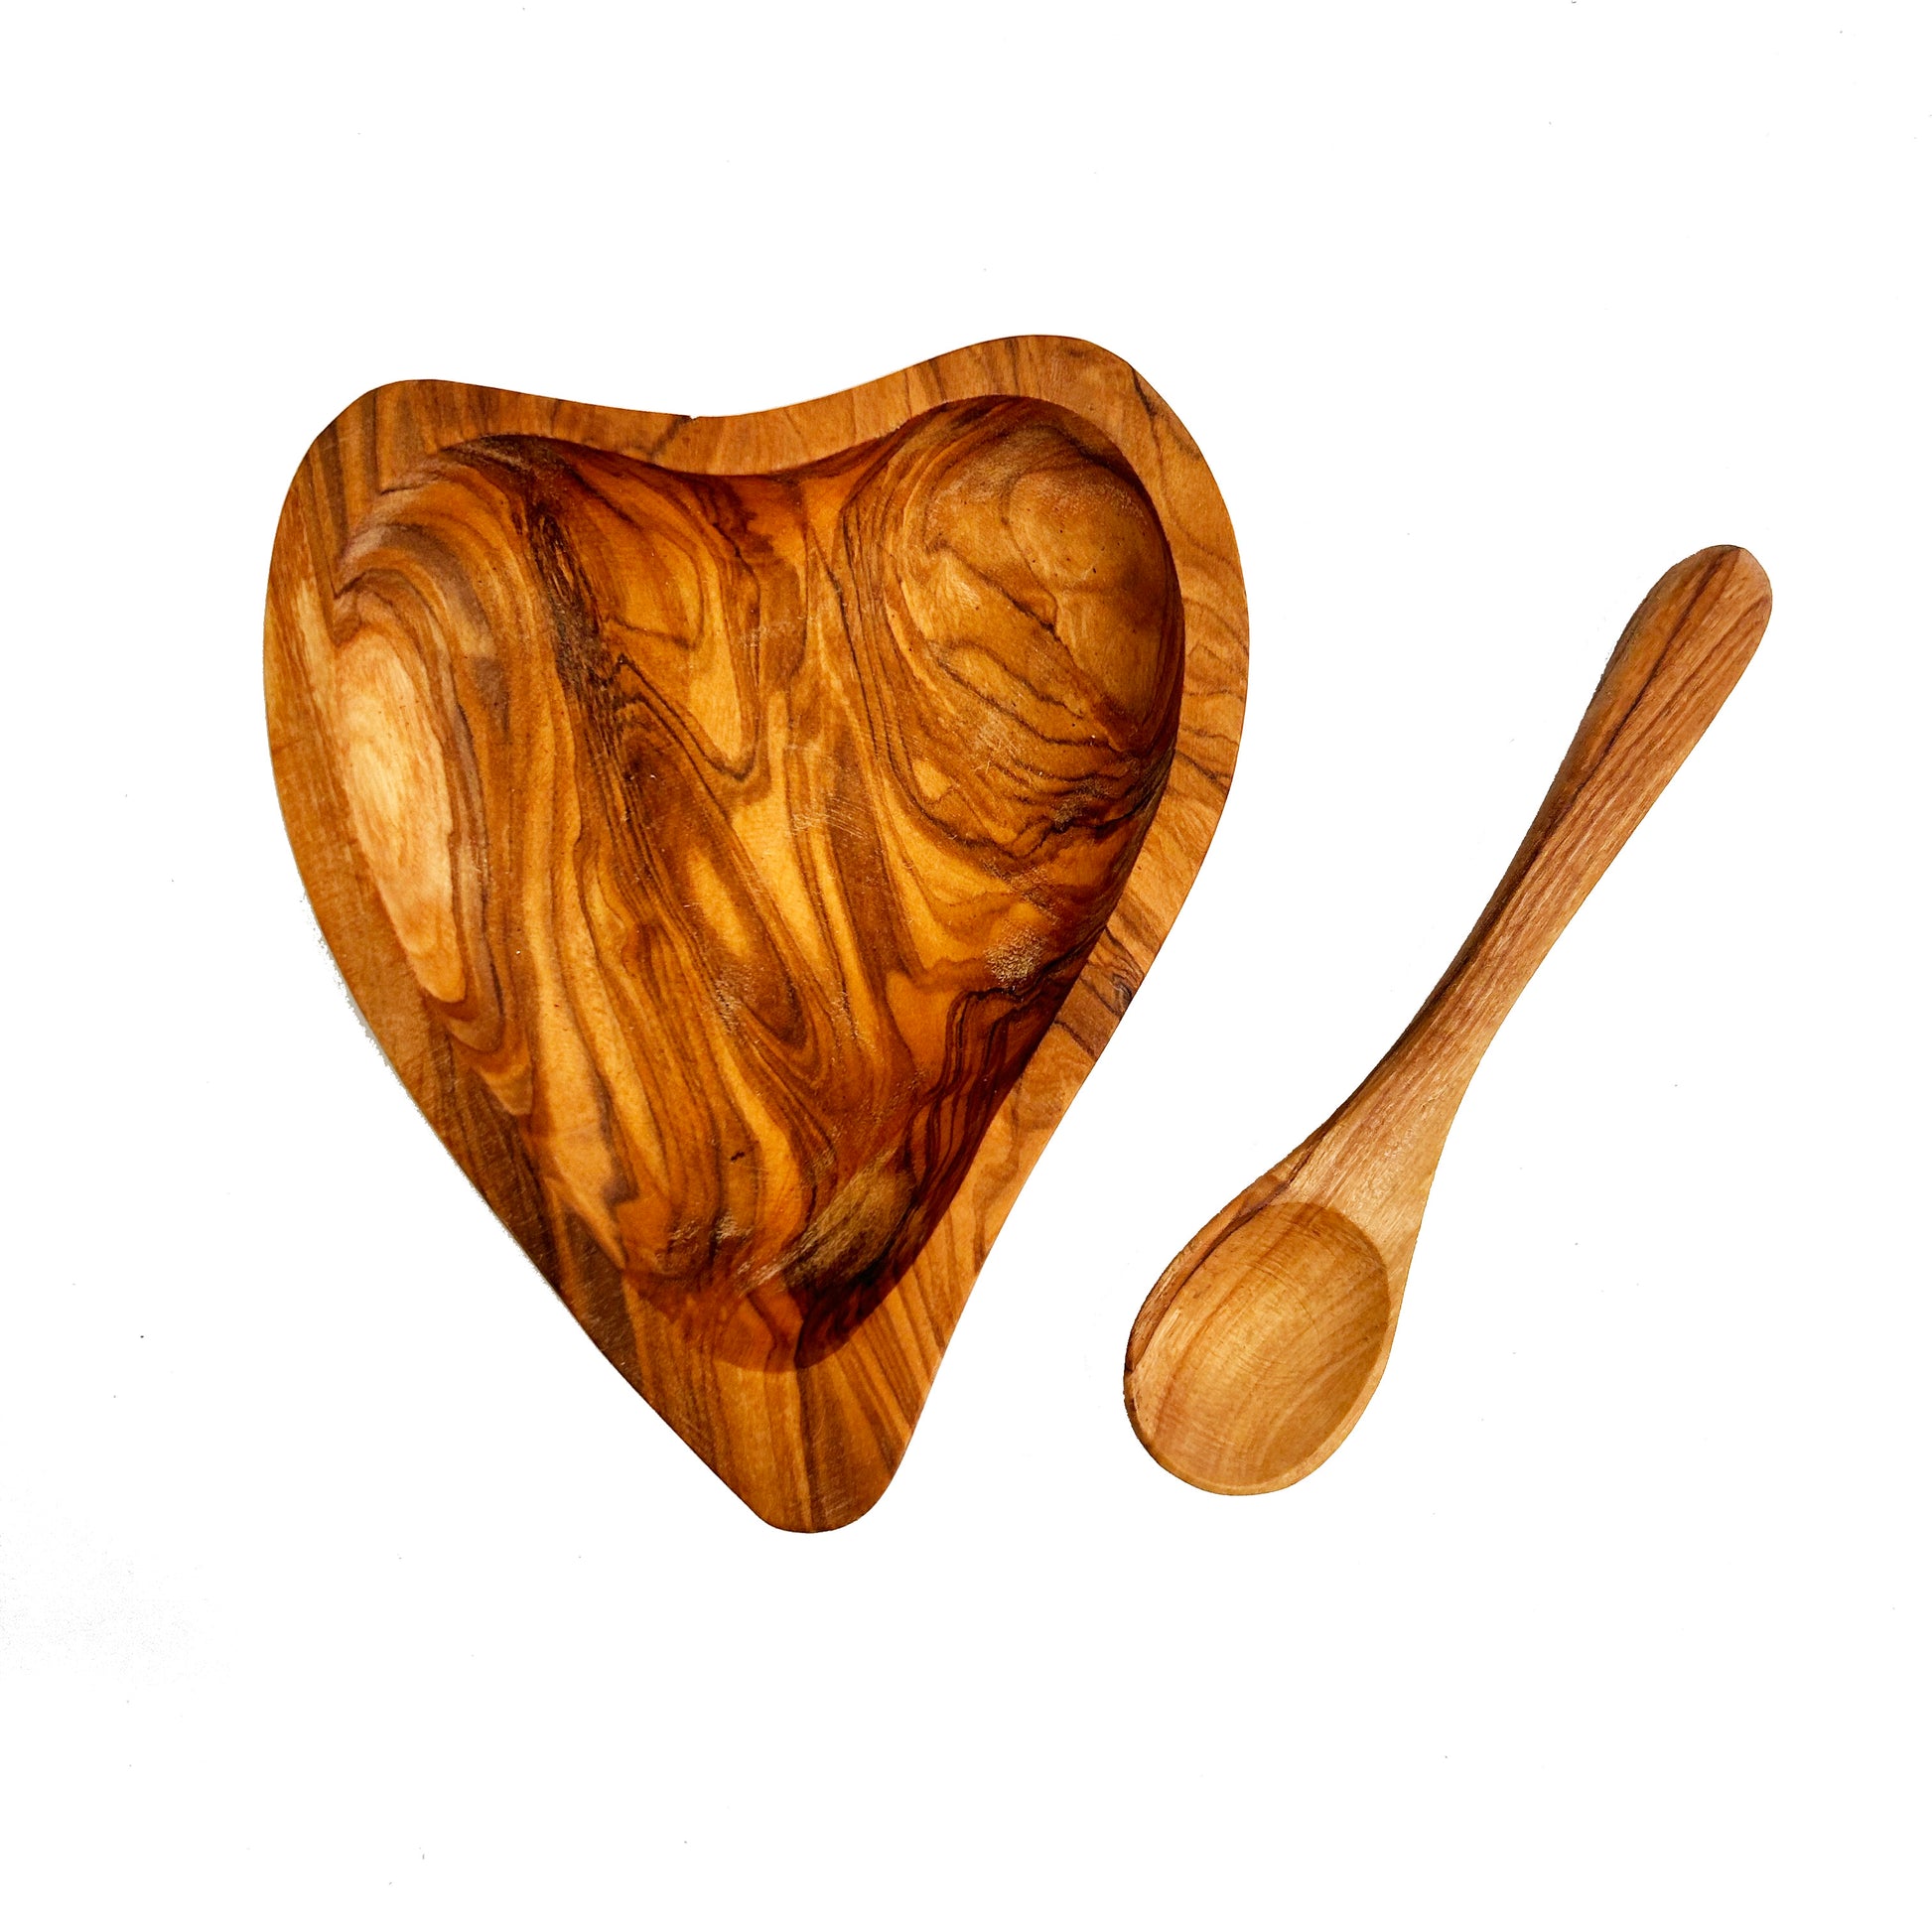 Olilve Wood Heart and Spoon